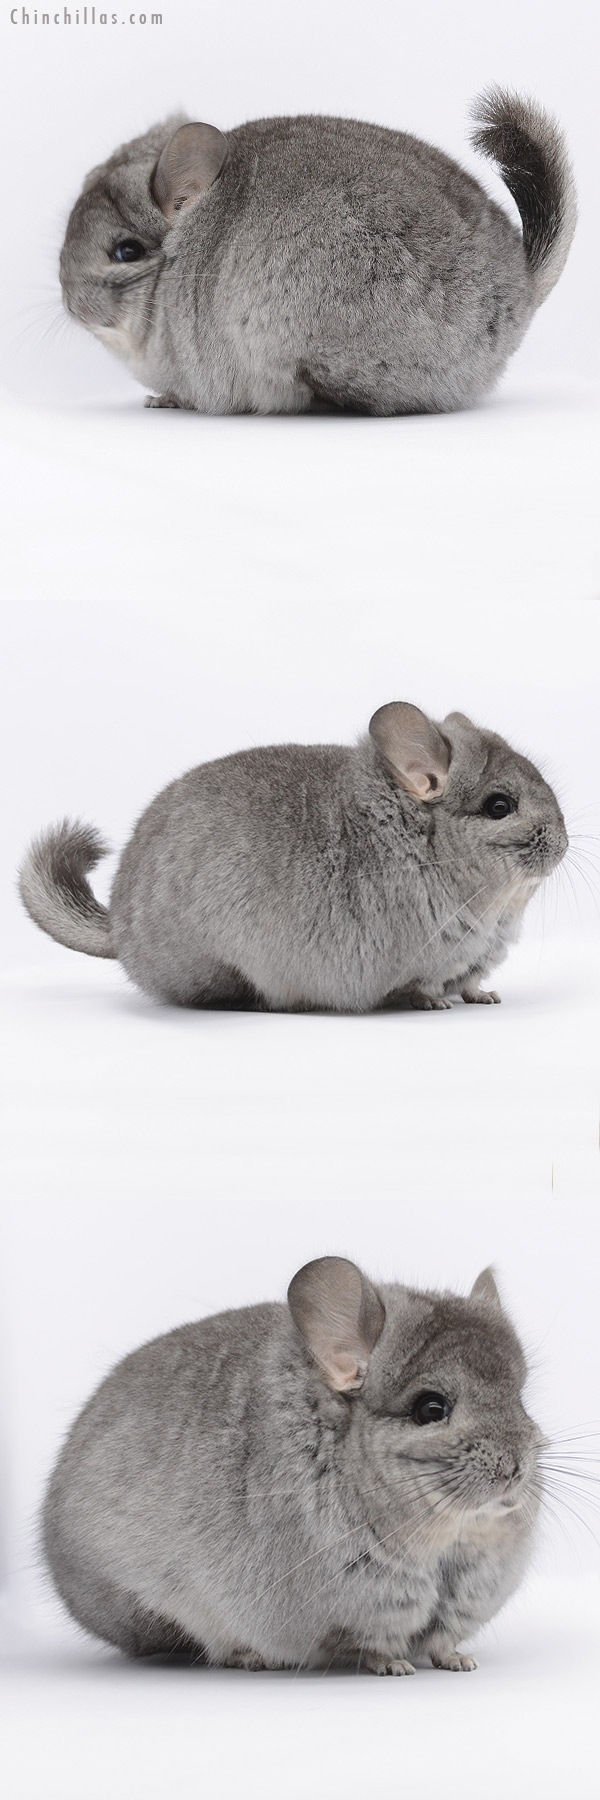 Chinchilla or related item offered for sale or export on Chinchillas.com - 20270 Standard ( Ebony & Locken Carrier )  Royal Persian Angora Female Chinchilla